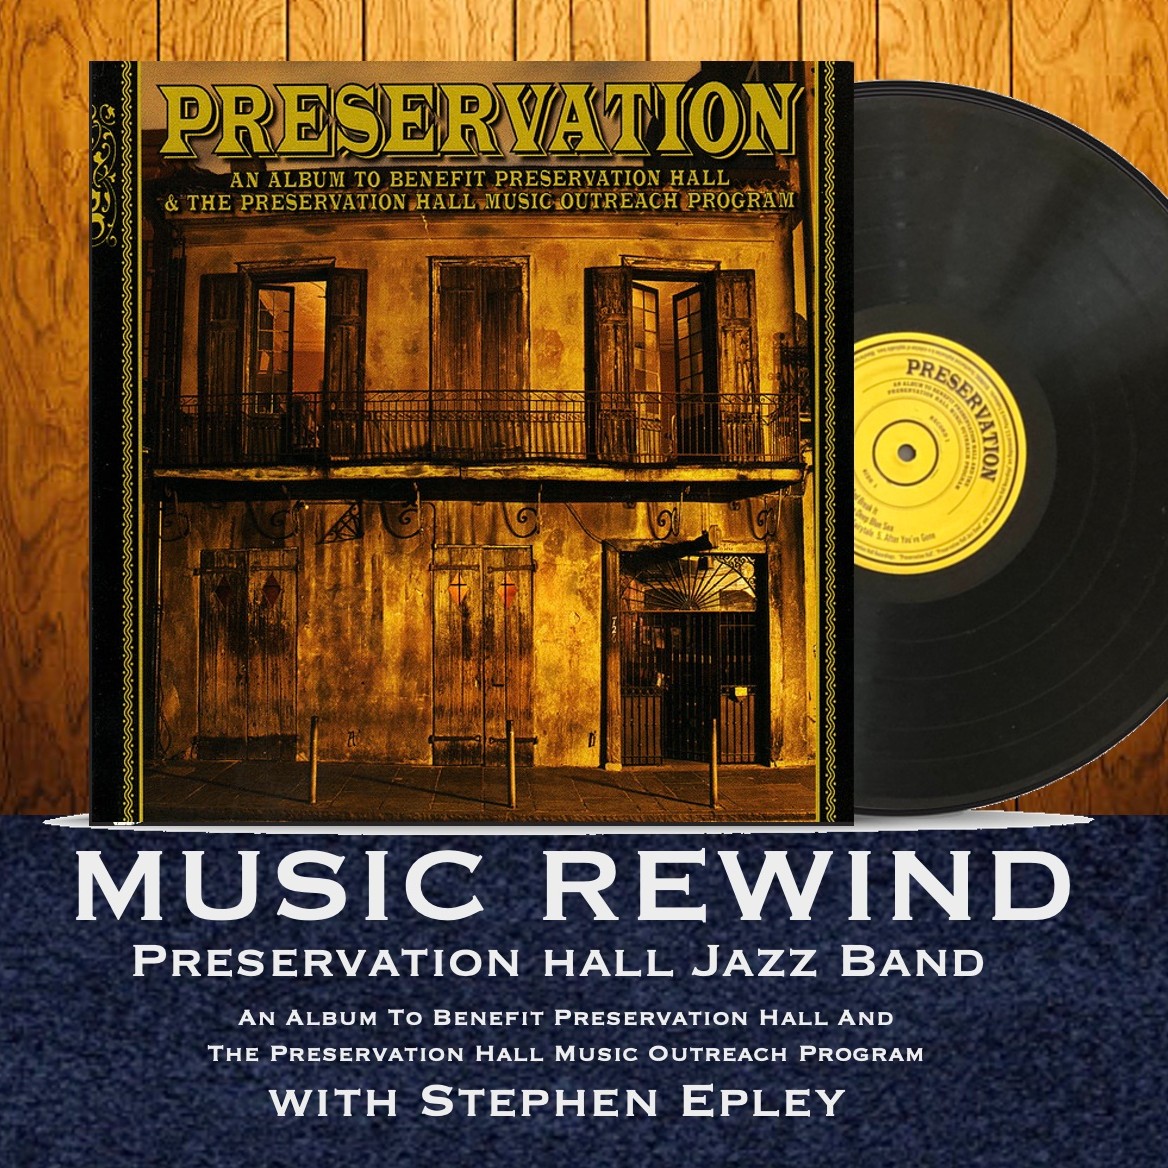 Preservation Hall Jazz Band with guest Stephen Epley